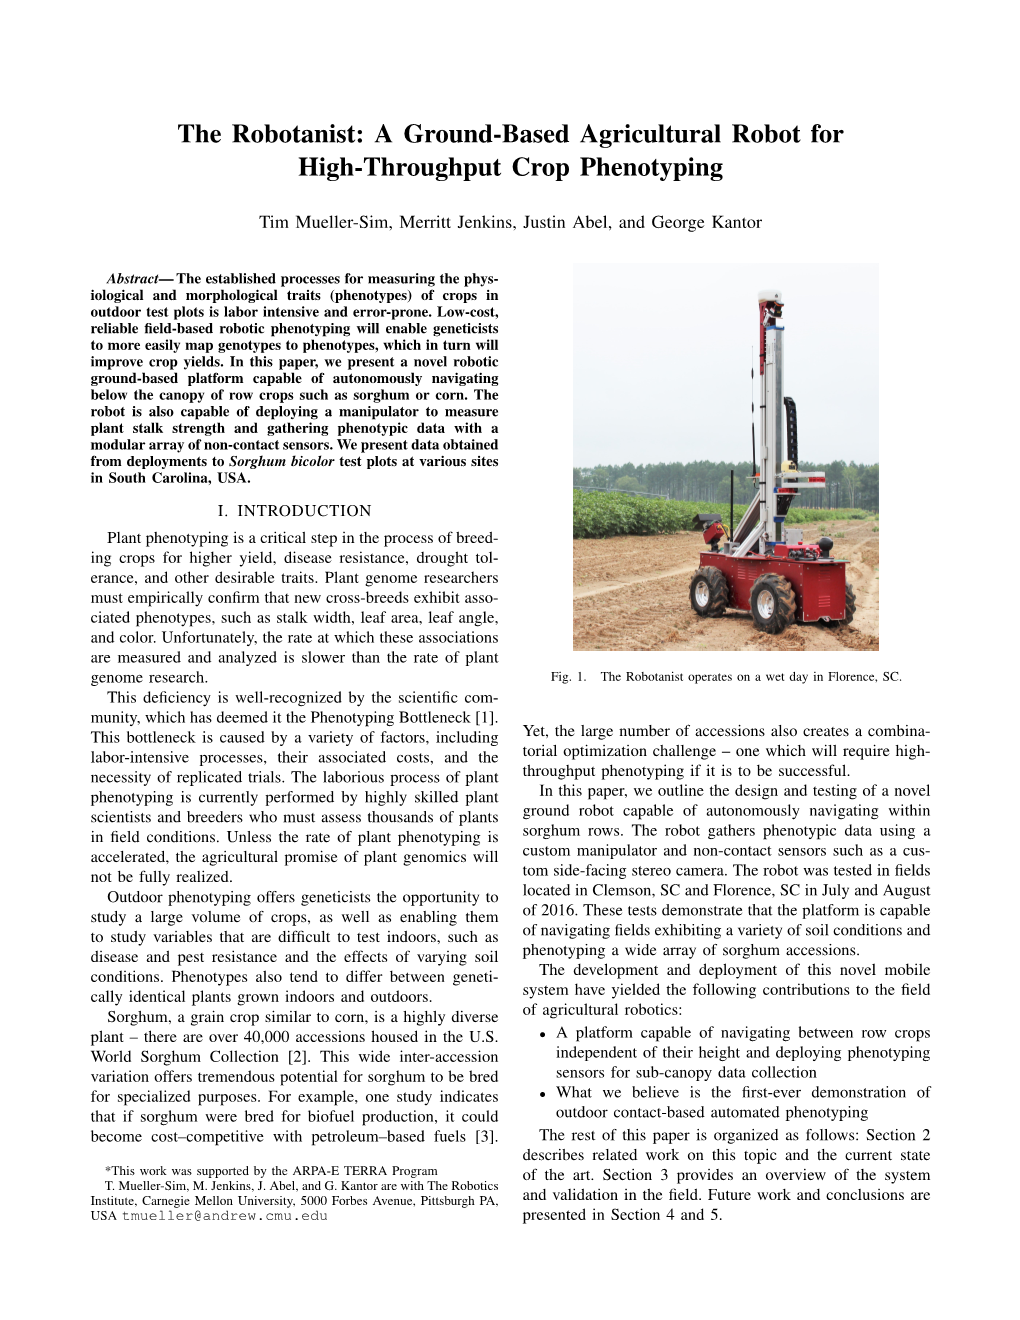 A Ground-Based Agricultural Robot for High-Throughput Crop Phenotyping